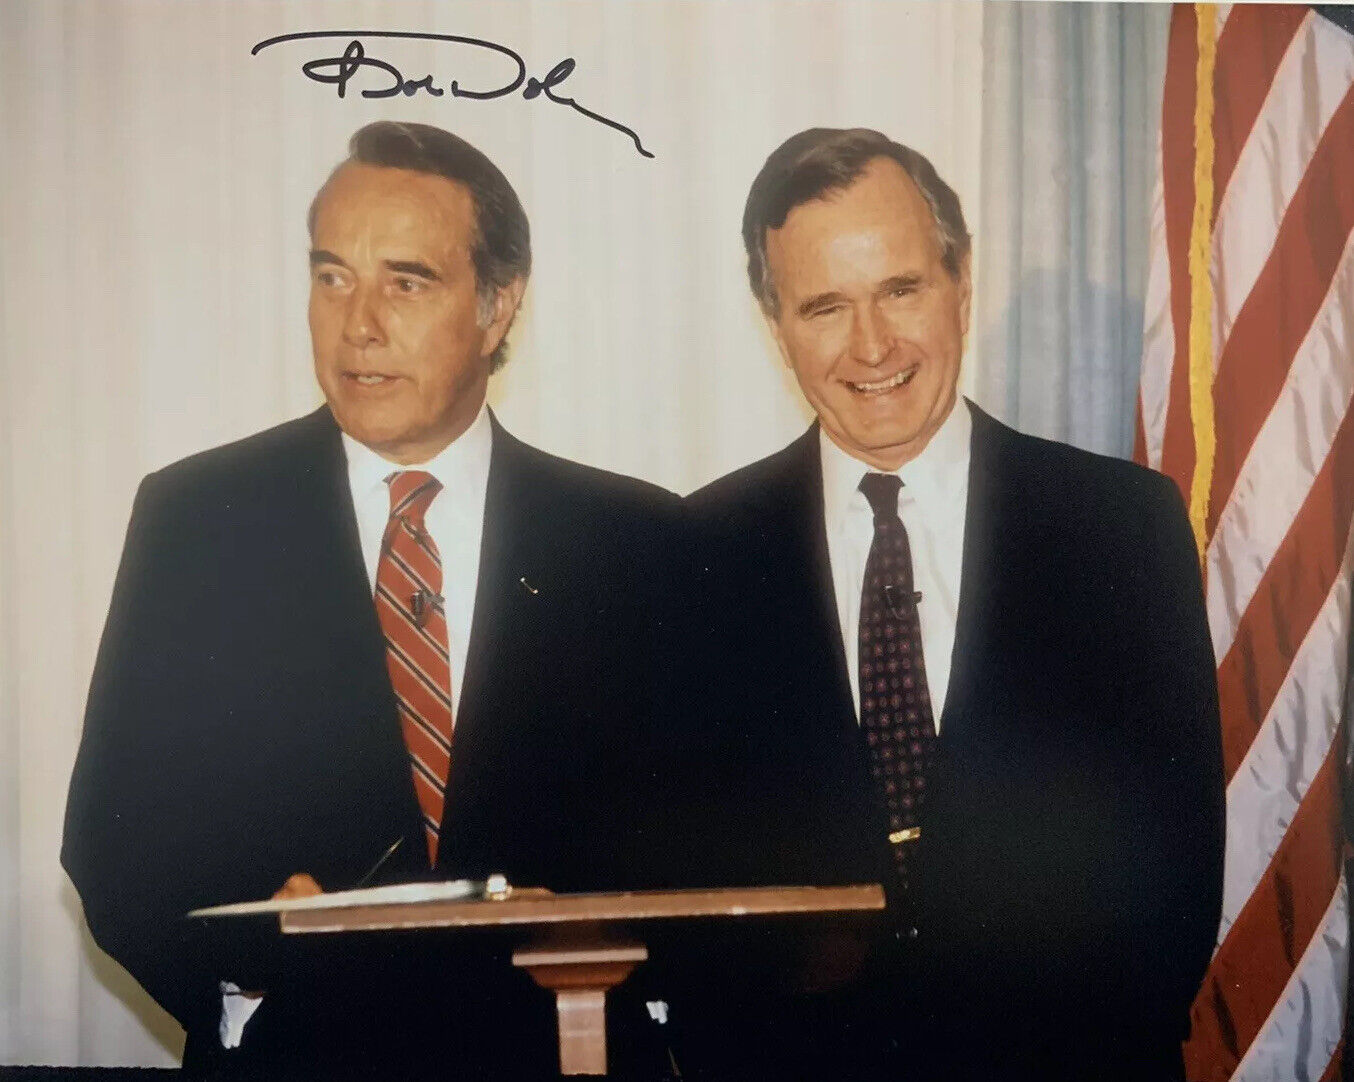 BOB DOLE SIGNED 8x10 Photo Poster painting POLITICIAN REPUBLICAN AUTOGRAPHED RARE